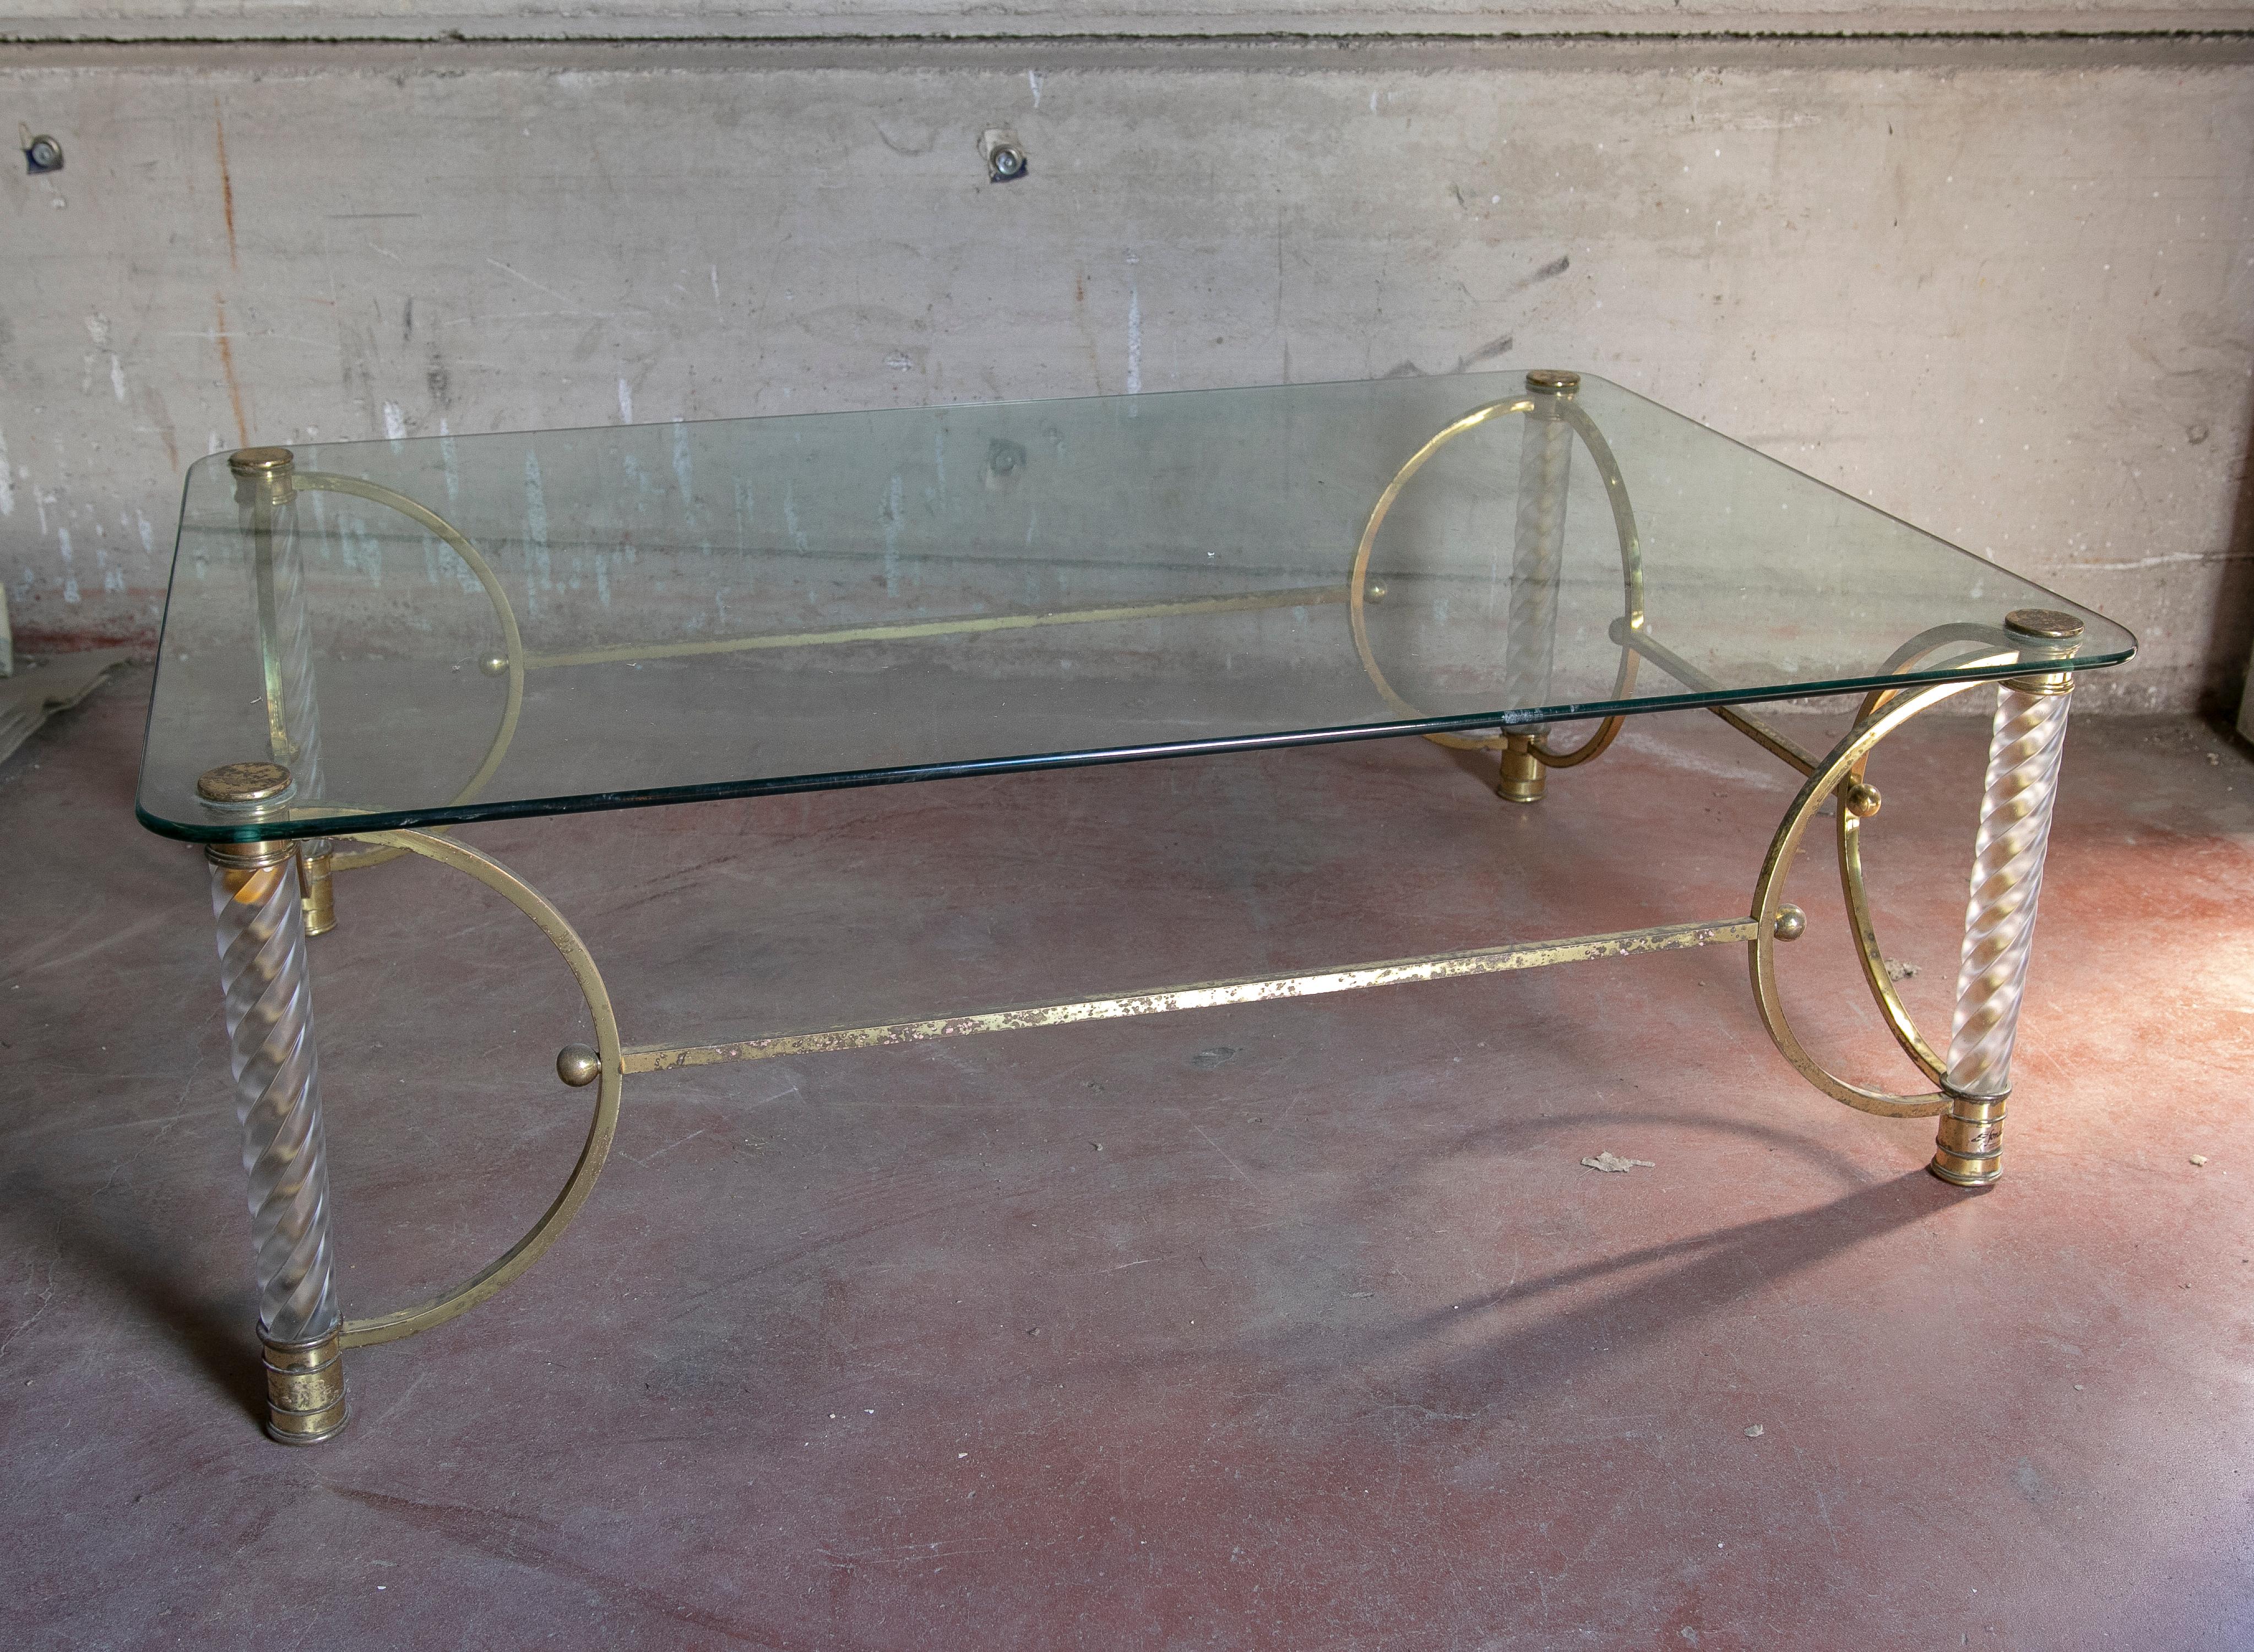 1970s gilded metal table with legs and glass table top.